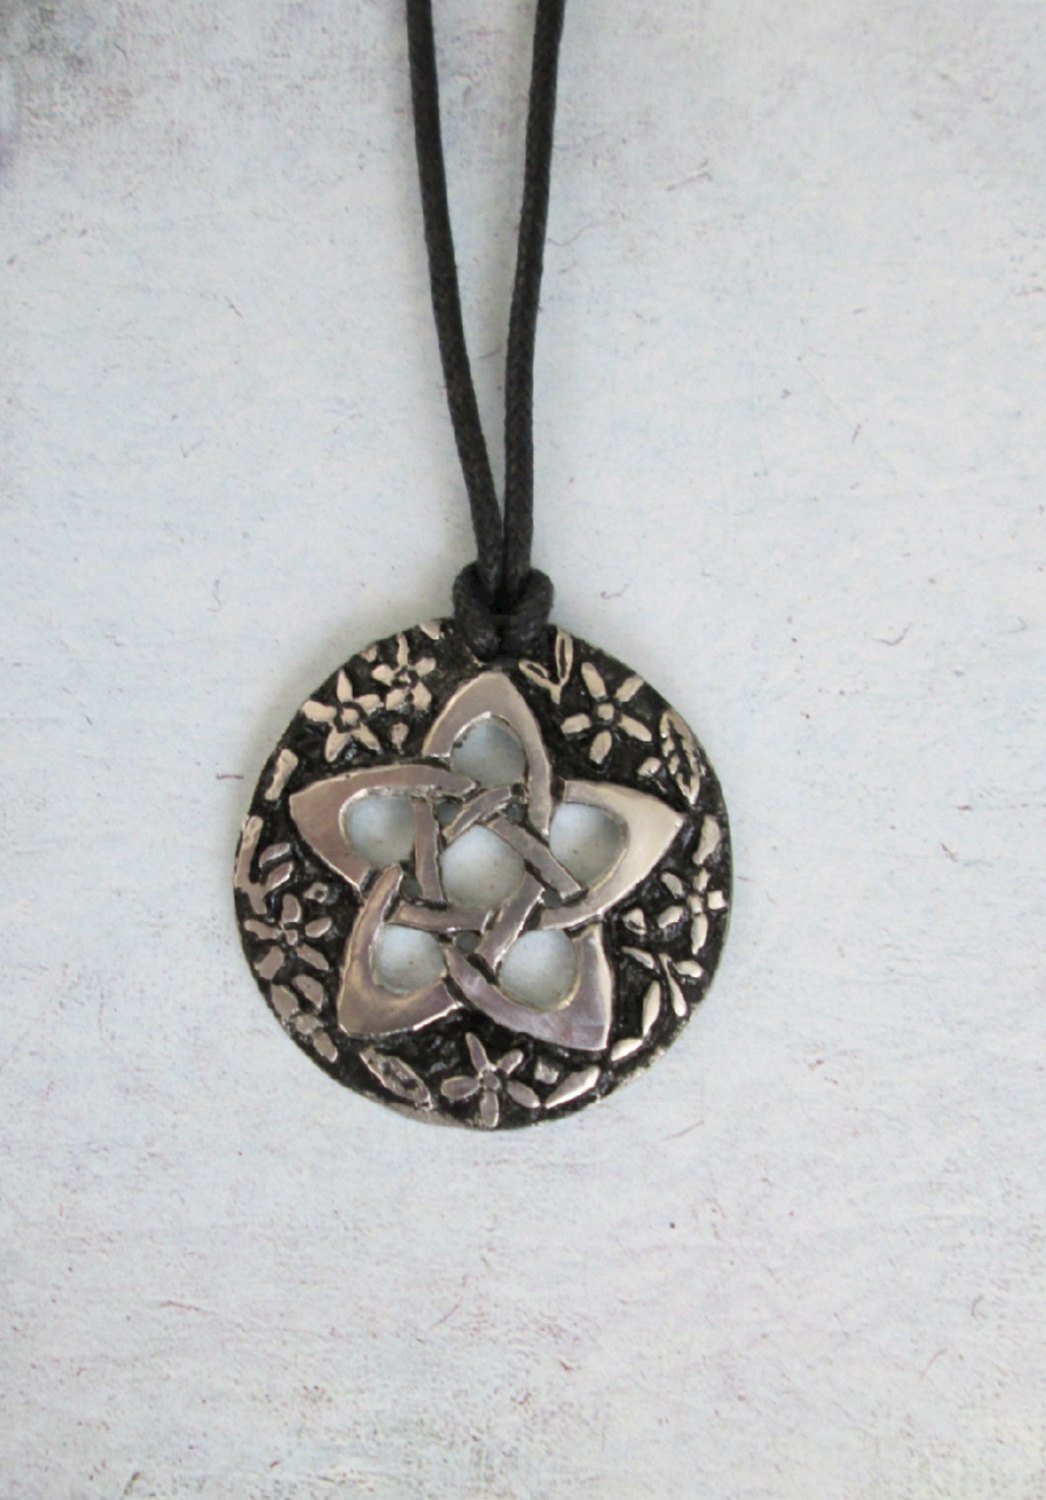 Flower pentacle protection pendant necklace. Pagan Celtic knot star necklace. Metal chain necklace